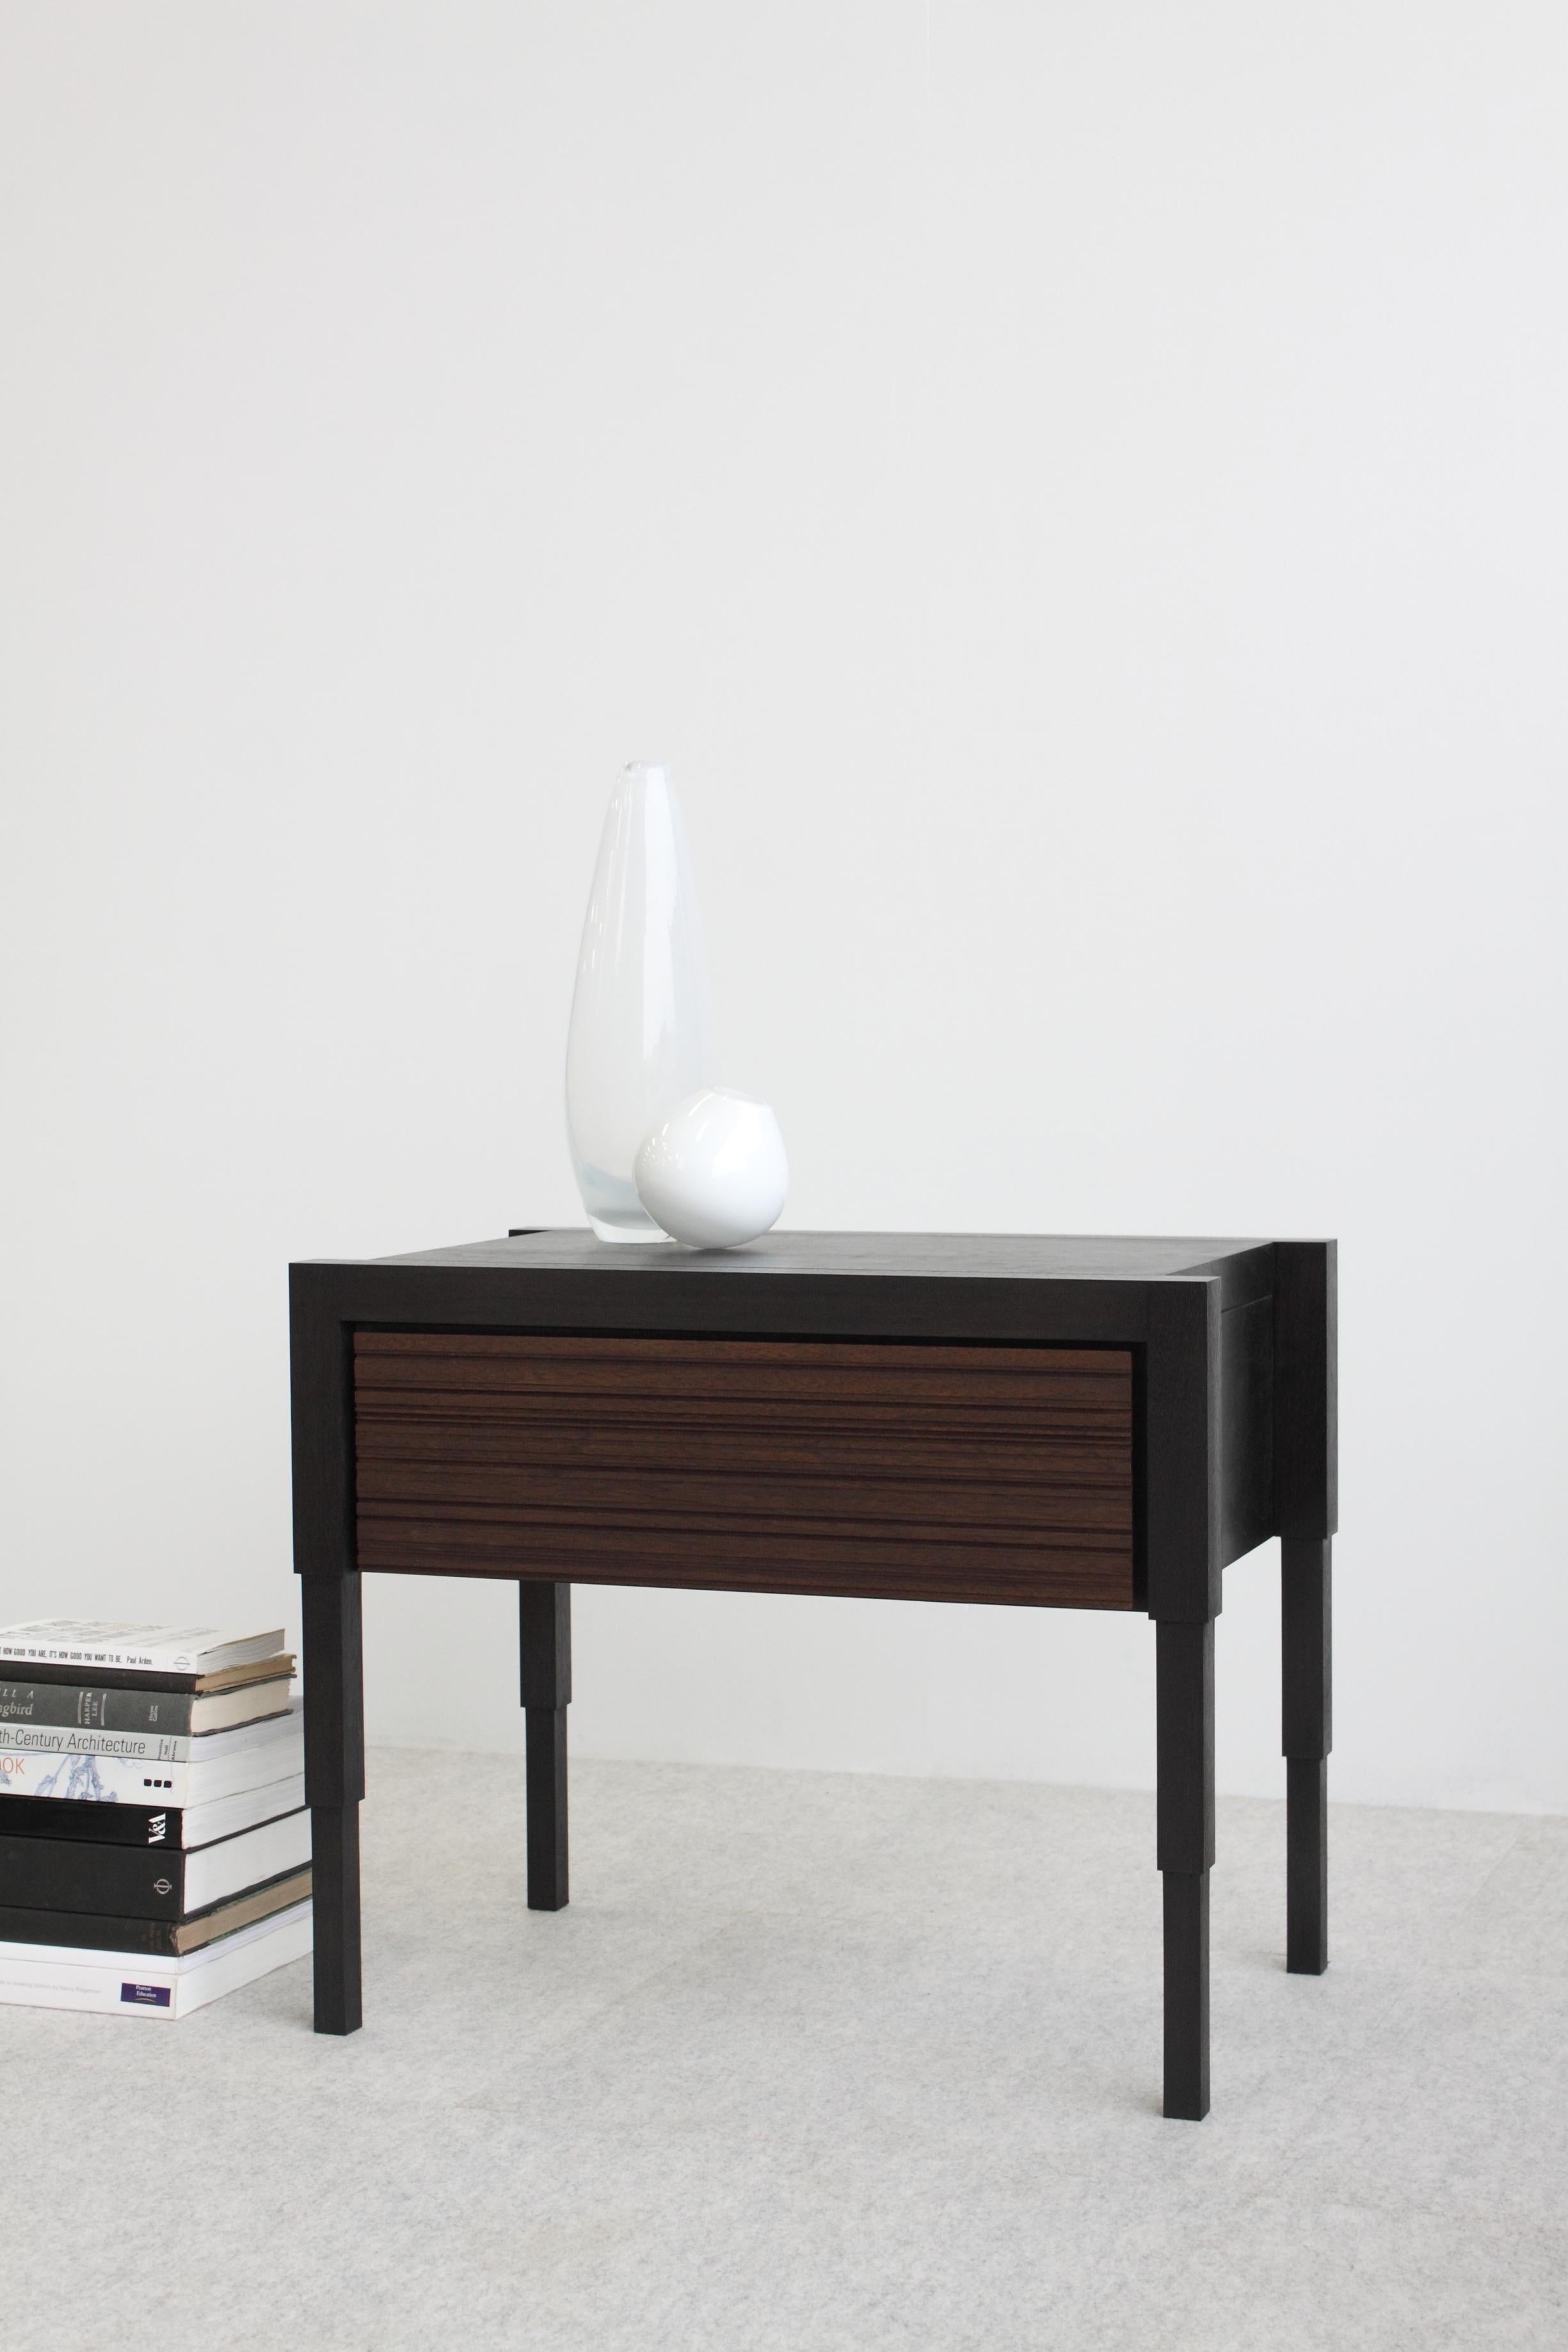 Careful consideration to detail is the acme to the design of this architecturally inspired side table or nightstand. Each table is fabricated by hand and available to order in 8 solid or combination traditional wood finish options.  
Design features